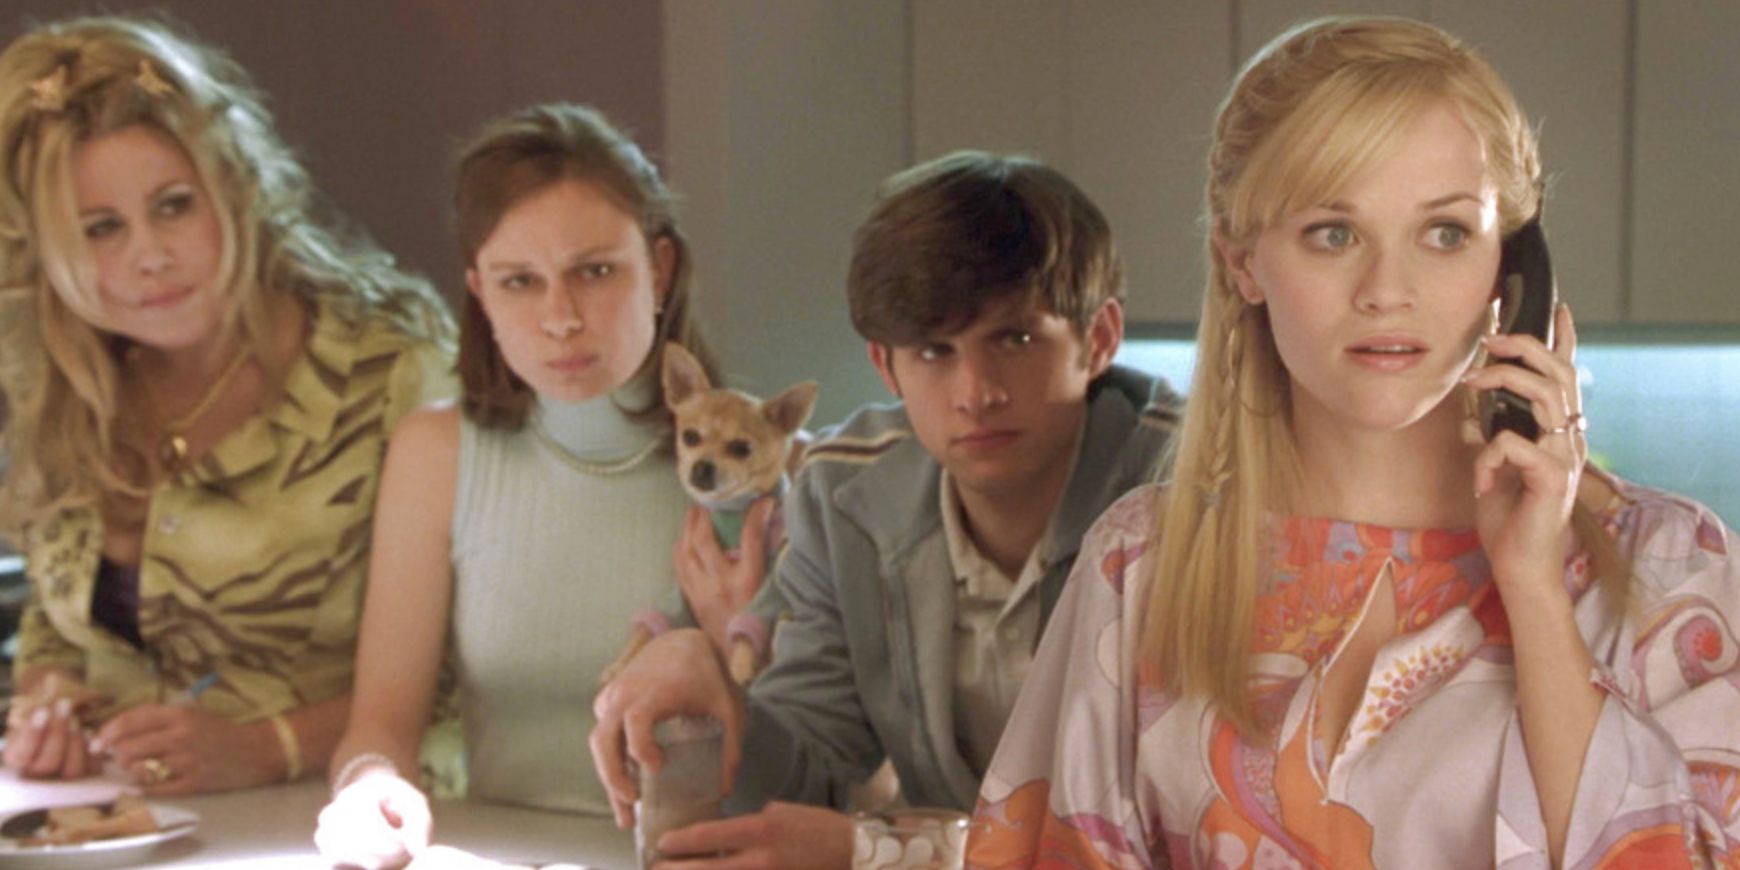 Elle takes a phone call while her friends wait behind hr in the kitchen in Legally Blonde 2